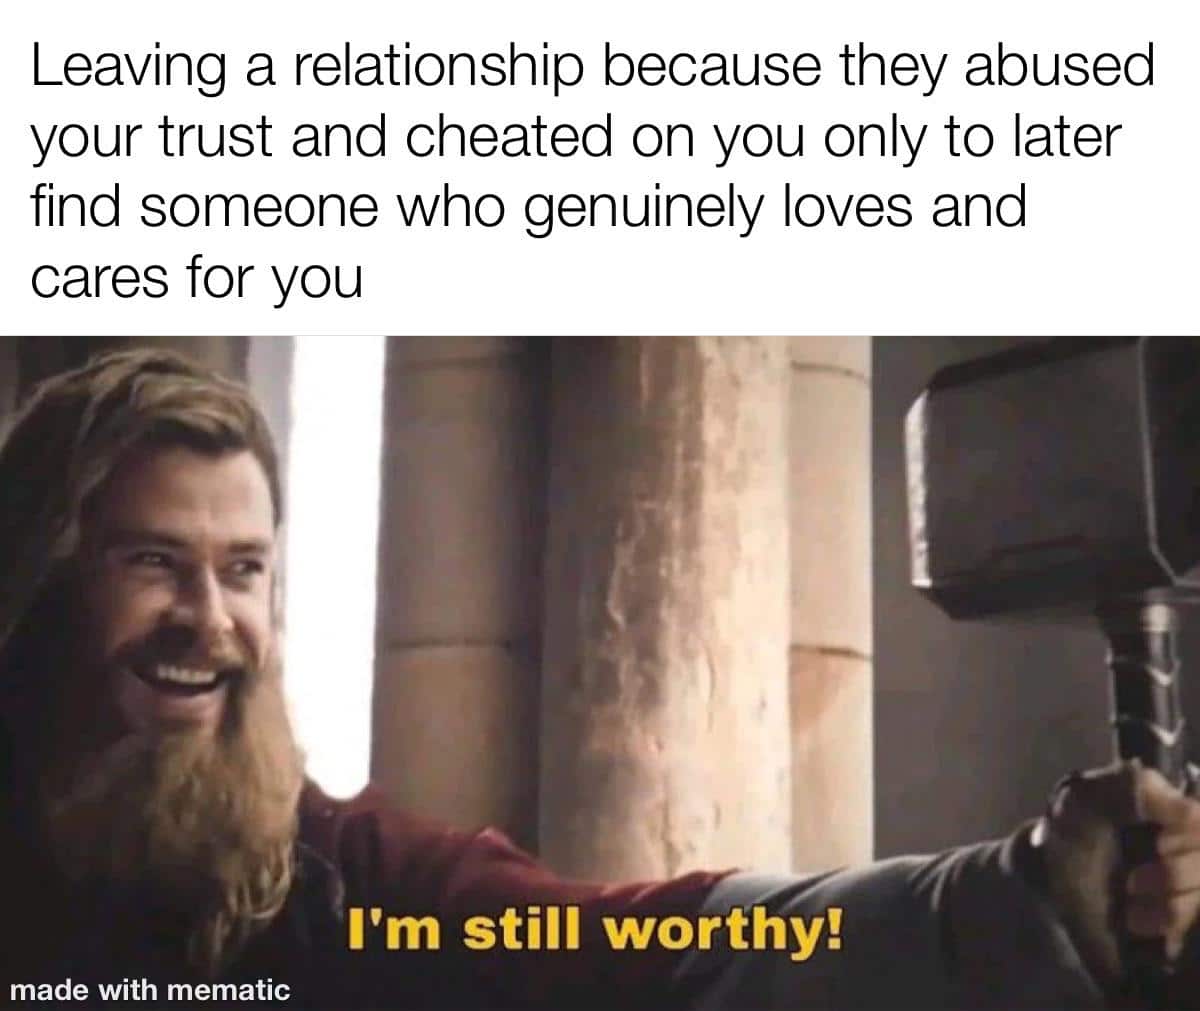 Wholesome memes, Thor Wholesome Memes Wholesome memes, Thor text: Leaving a relationship because they abused your trust and cheated on you only to later find someone who genuinely loves and cares for you I'm still worthy! made with mematic 